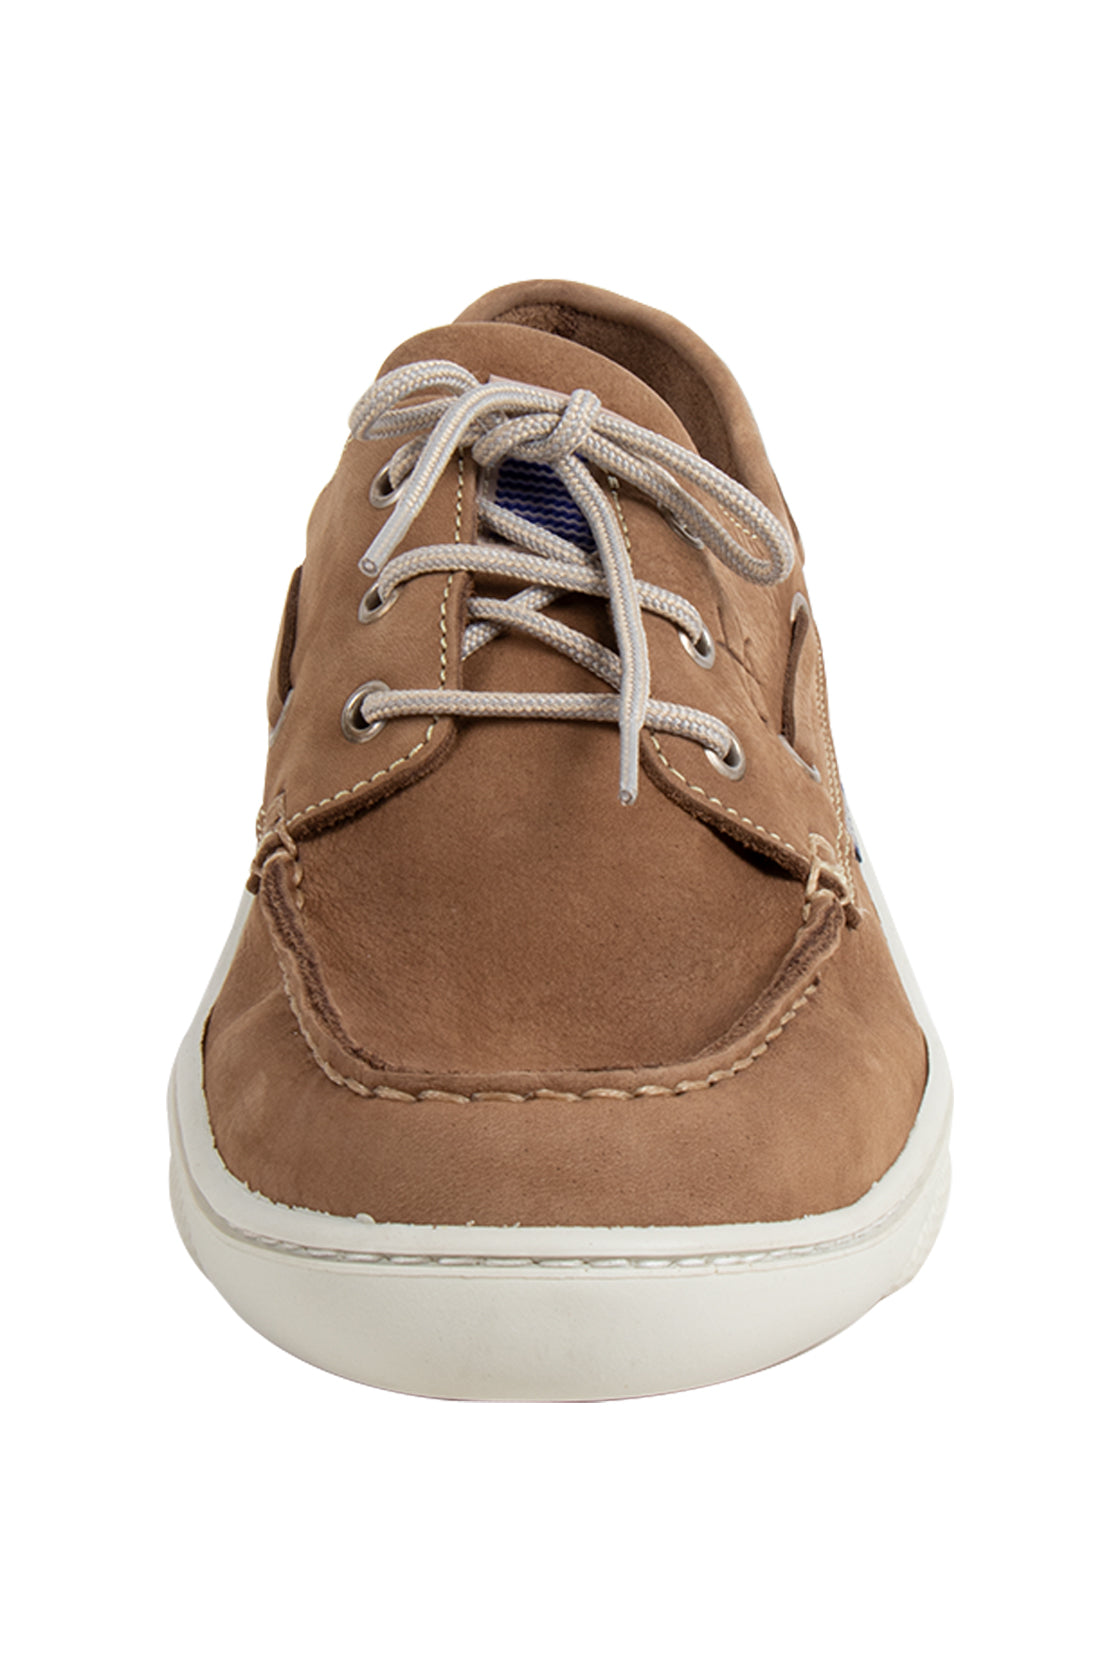 Christophe Auguin City Boat Shoe Taupe